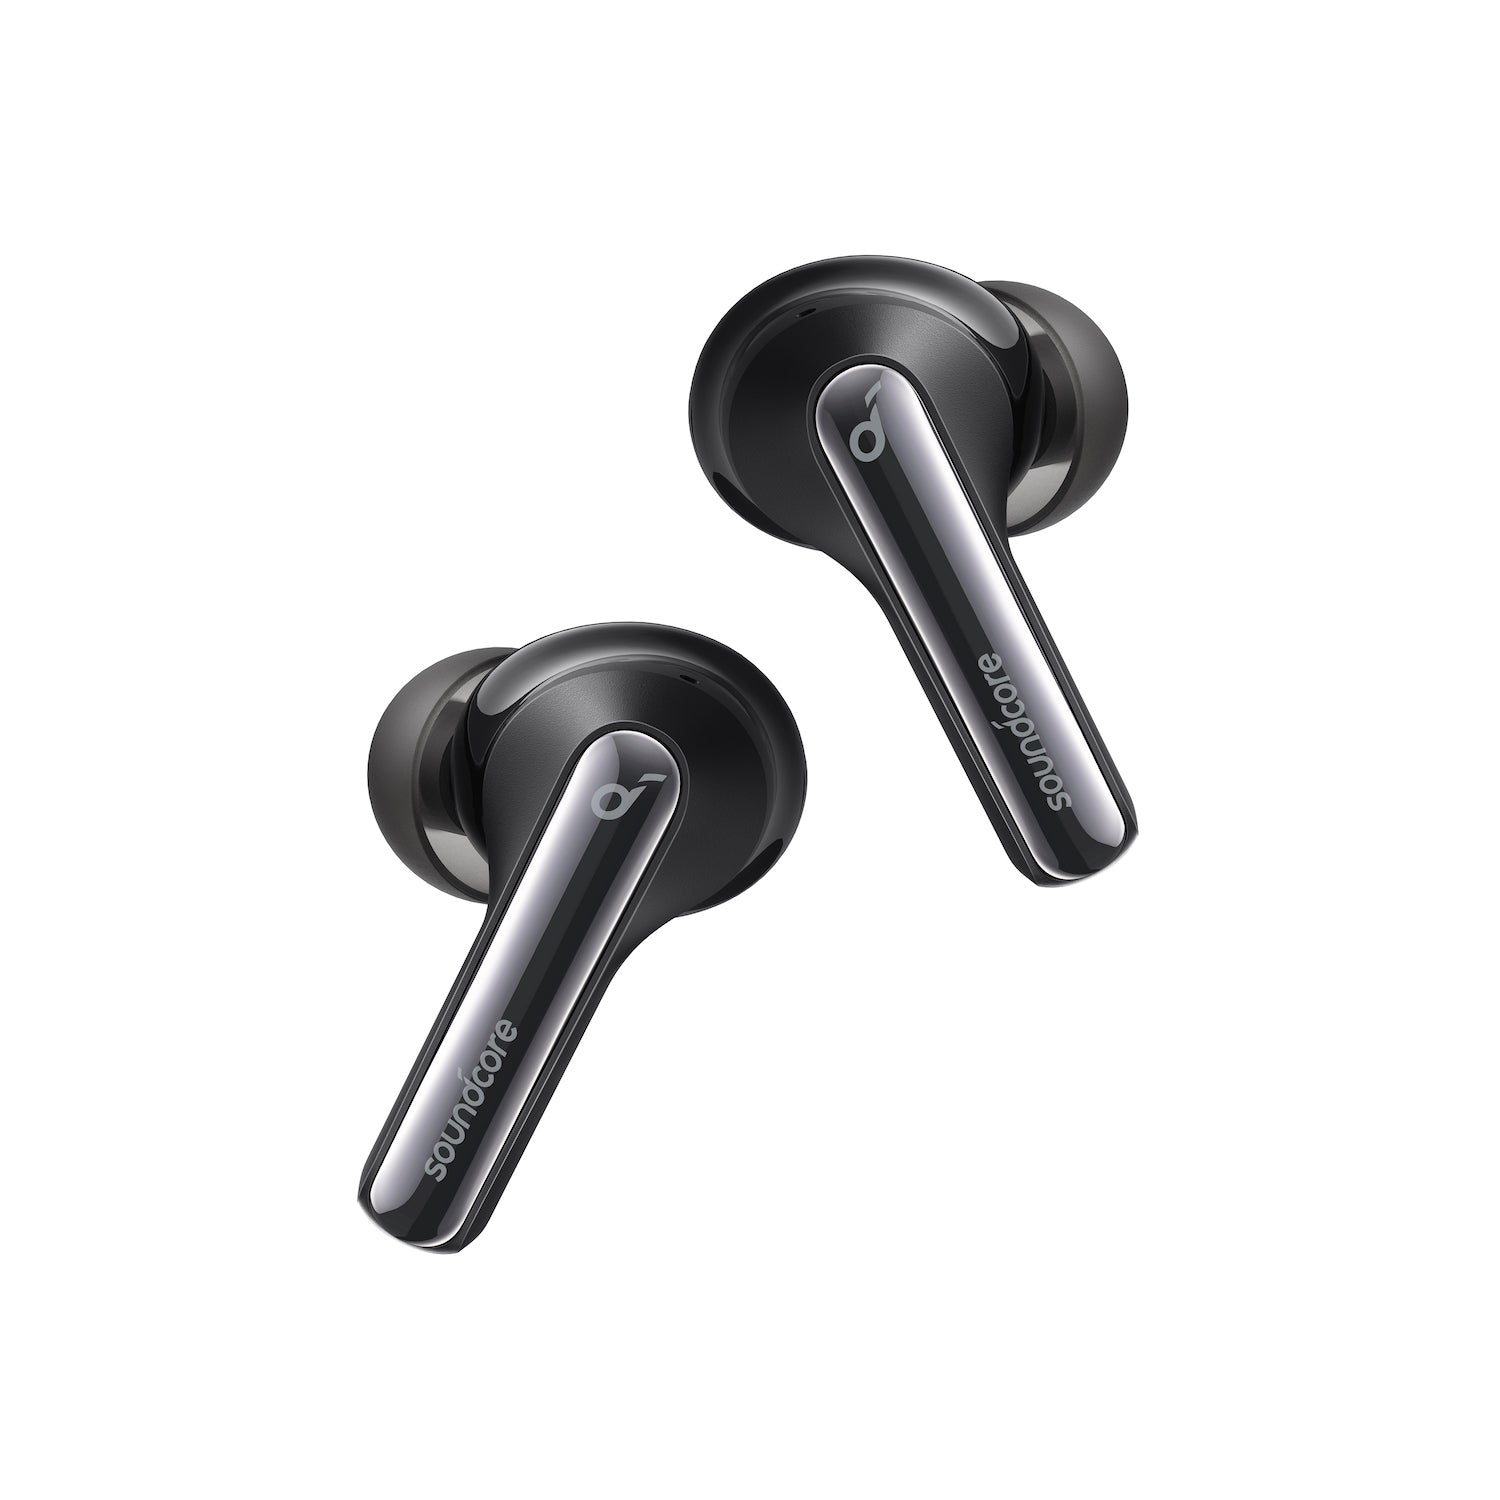 Anker Soundcore P20i Bluetooth Earphones With 30 Hours App in